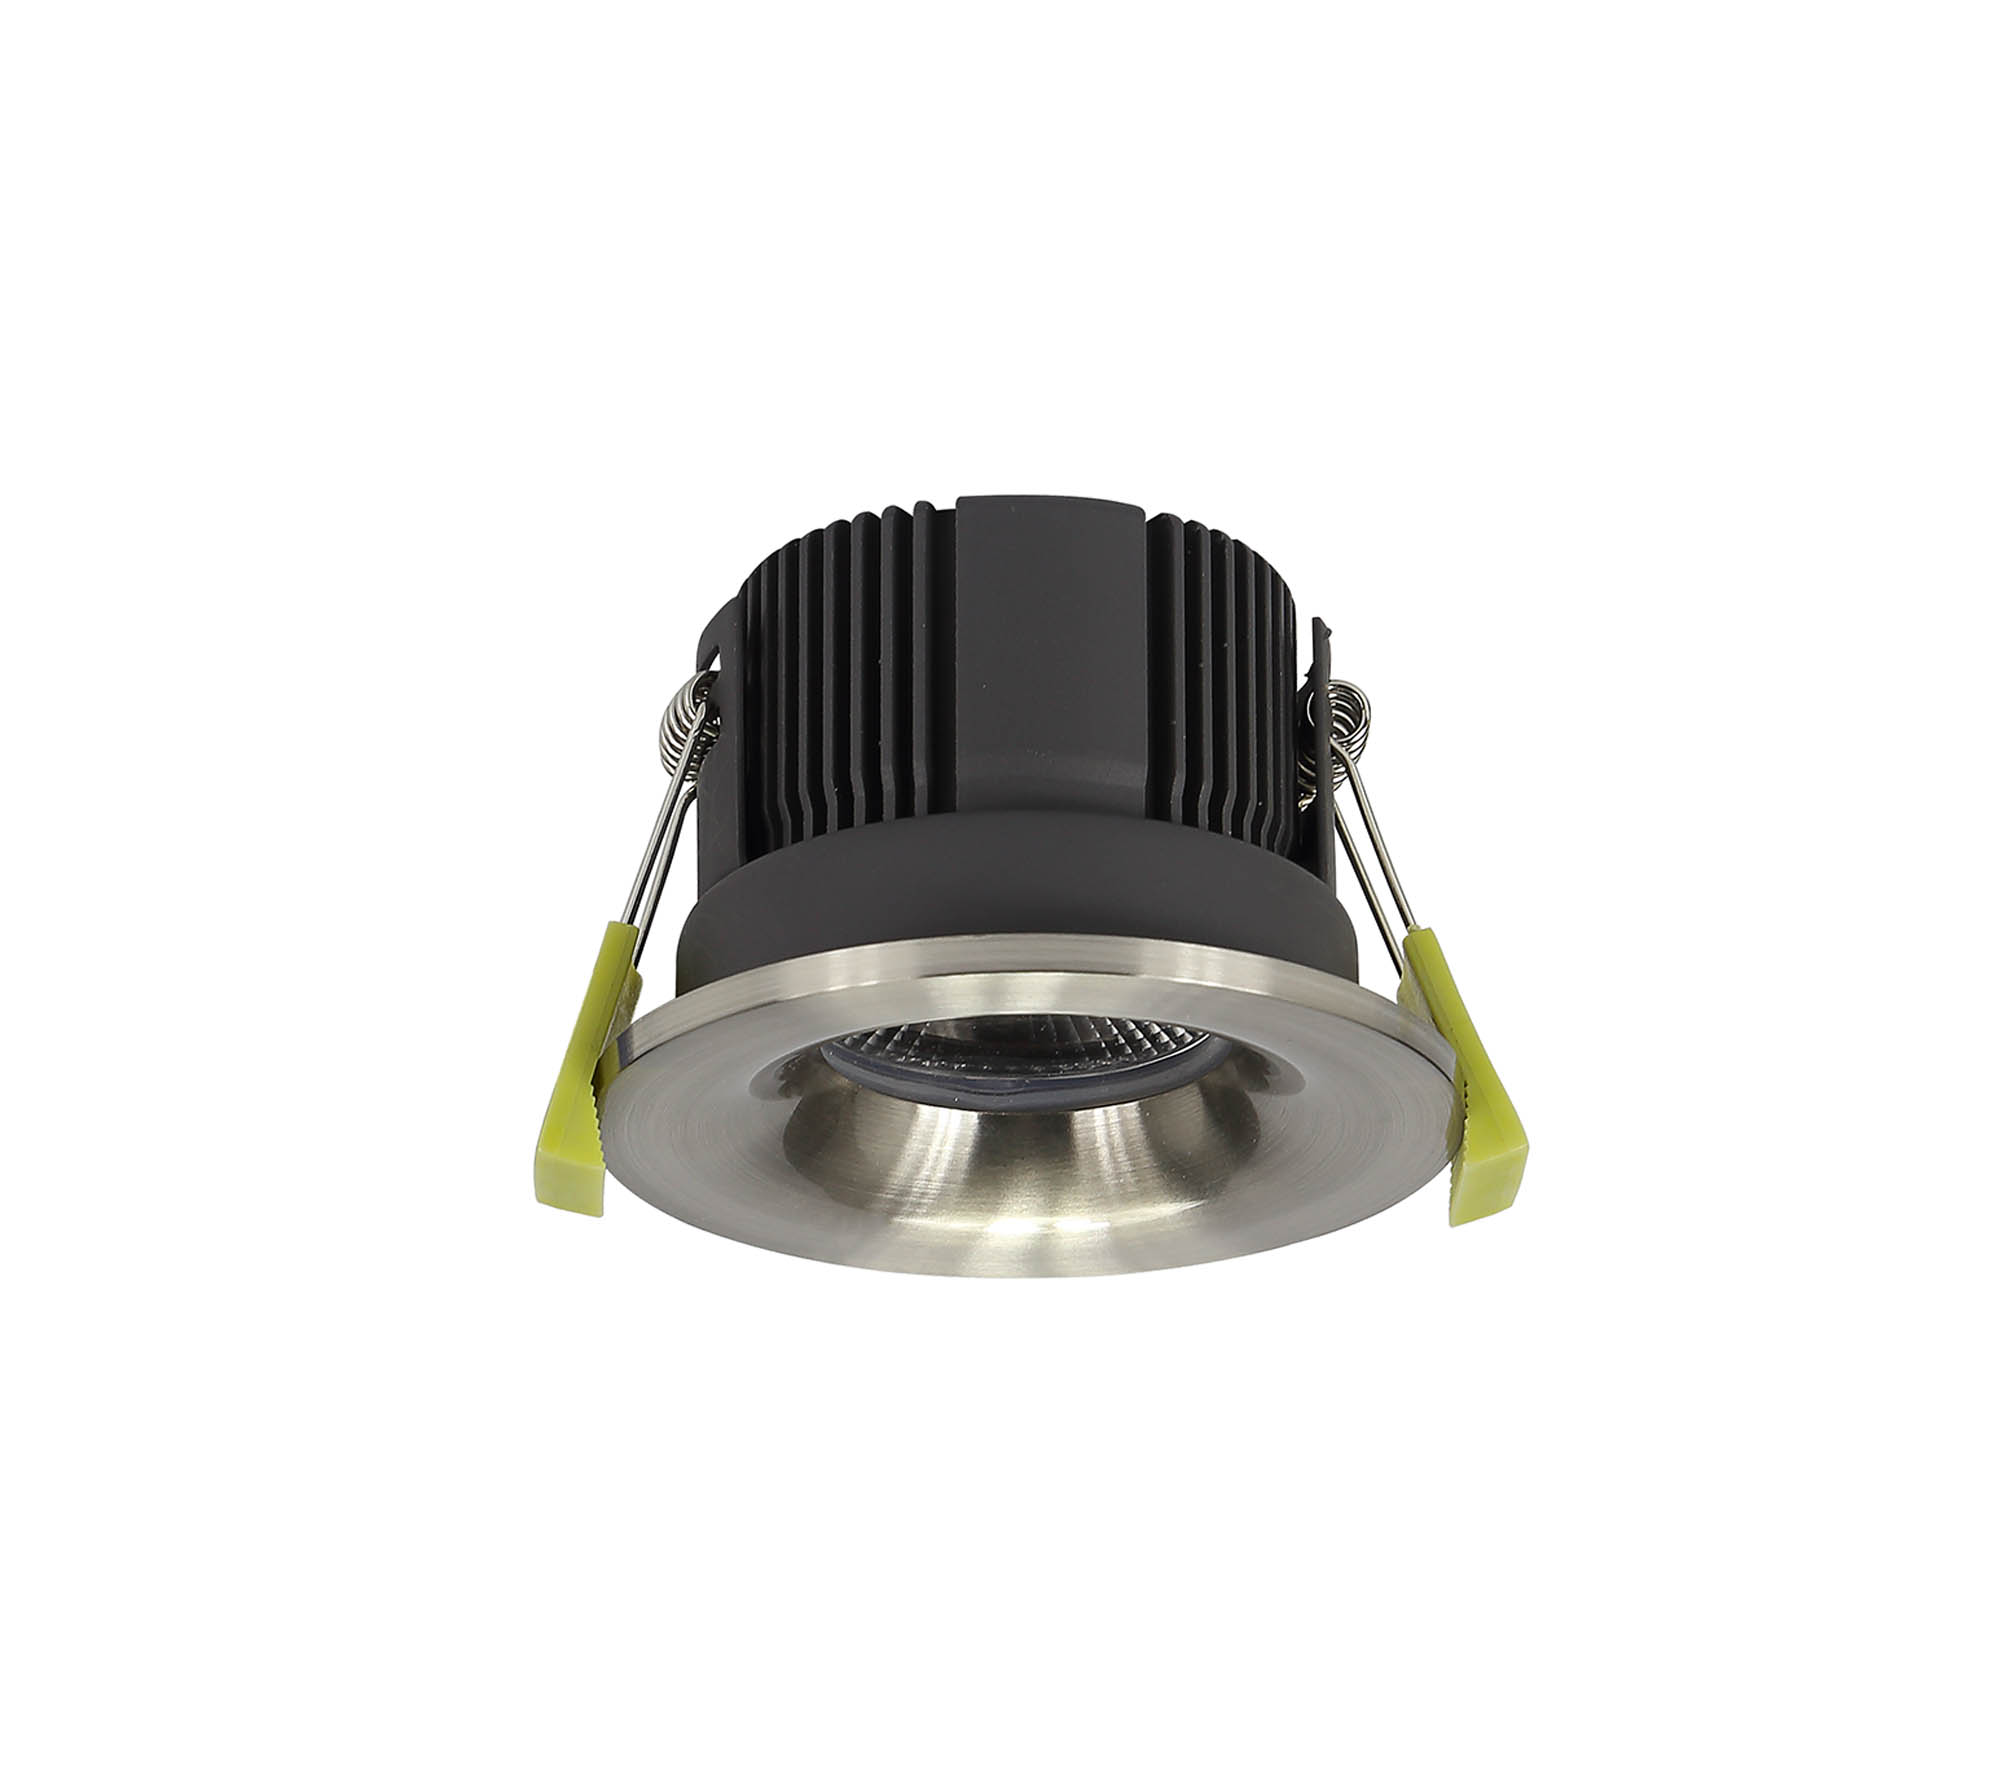 DM200684  Beck 11 FR, 11W, IP65 Satin Nickel LED Recessed Curved Fire Rated Downlight, Cut Out 68mm, 2700K, PLUG IN DRIVER INCLUDED, 3yrs Warranty